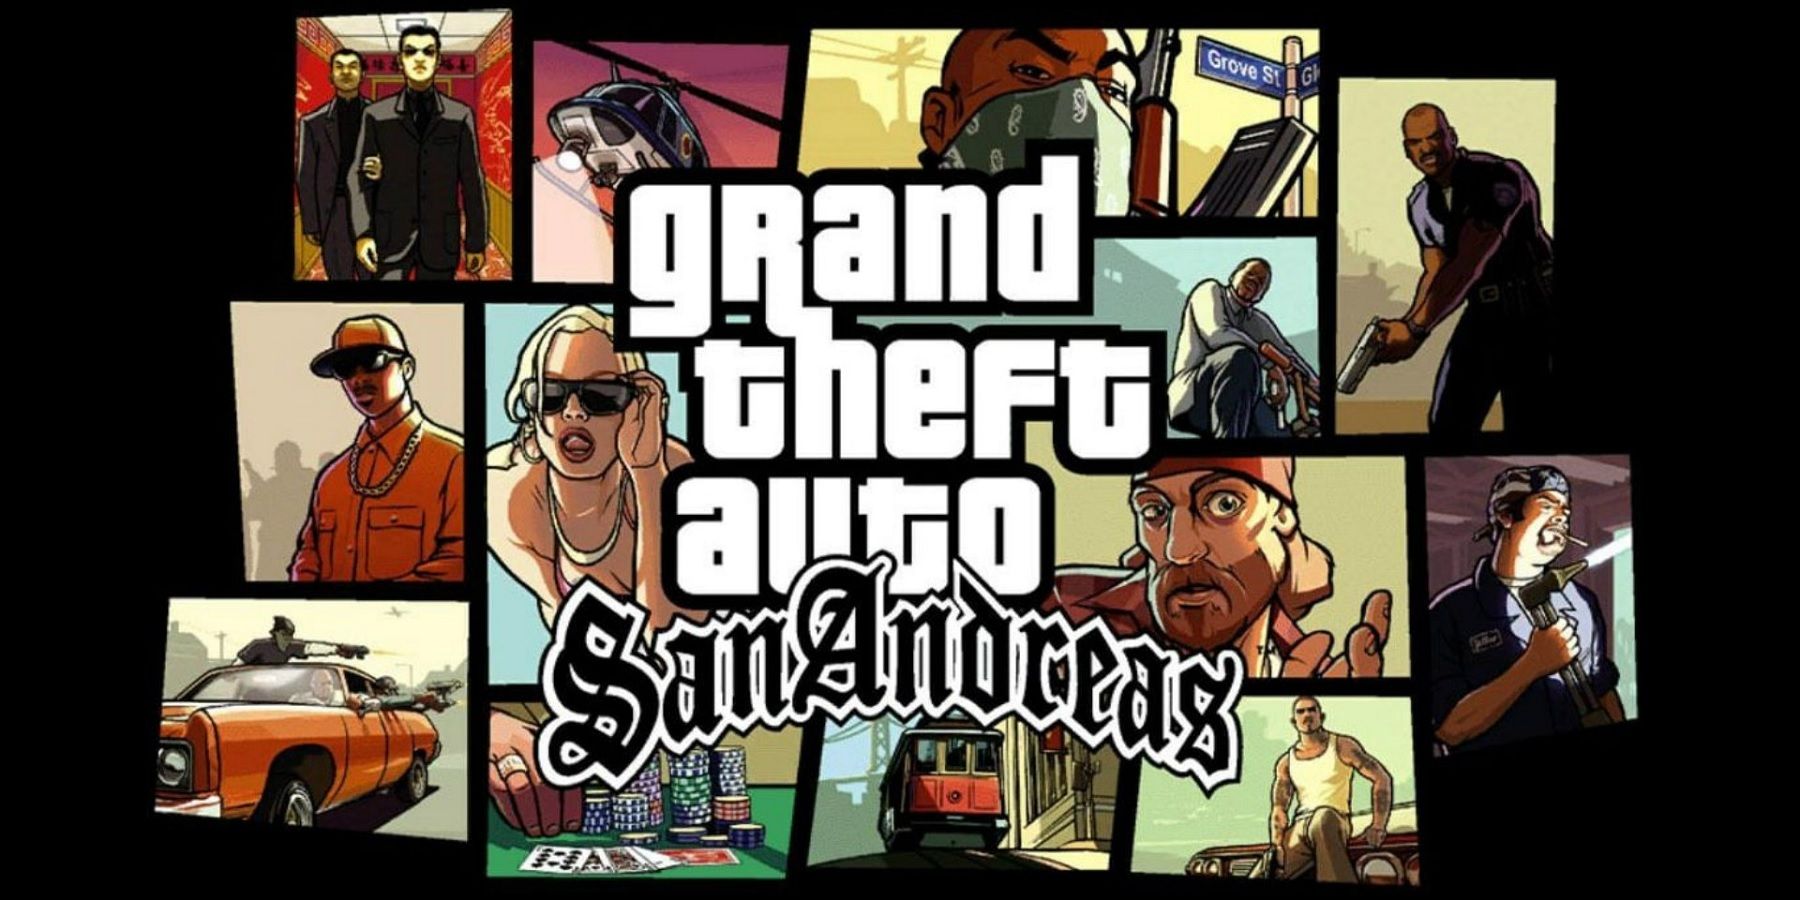 GameSpy: Grand Theft Auto: San Andreas -- Bored in San Andreas - Page 1